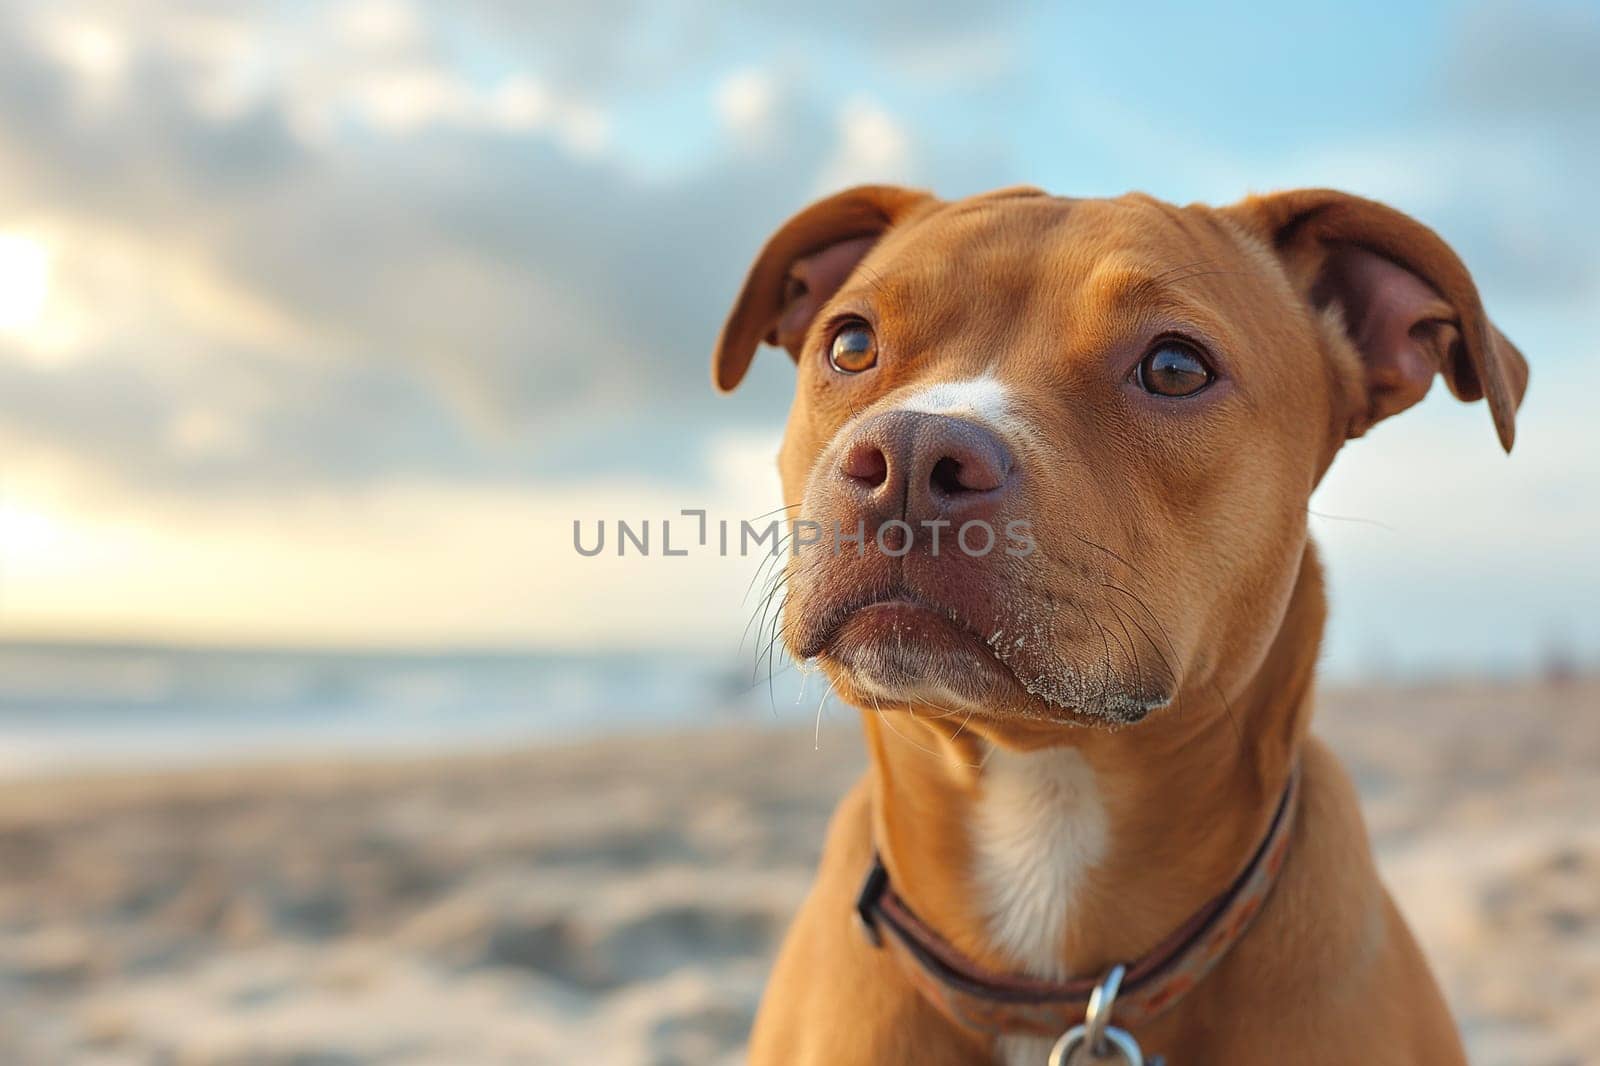 A pitbull relaxing on the beach during sunset by Hype2art